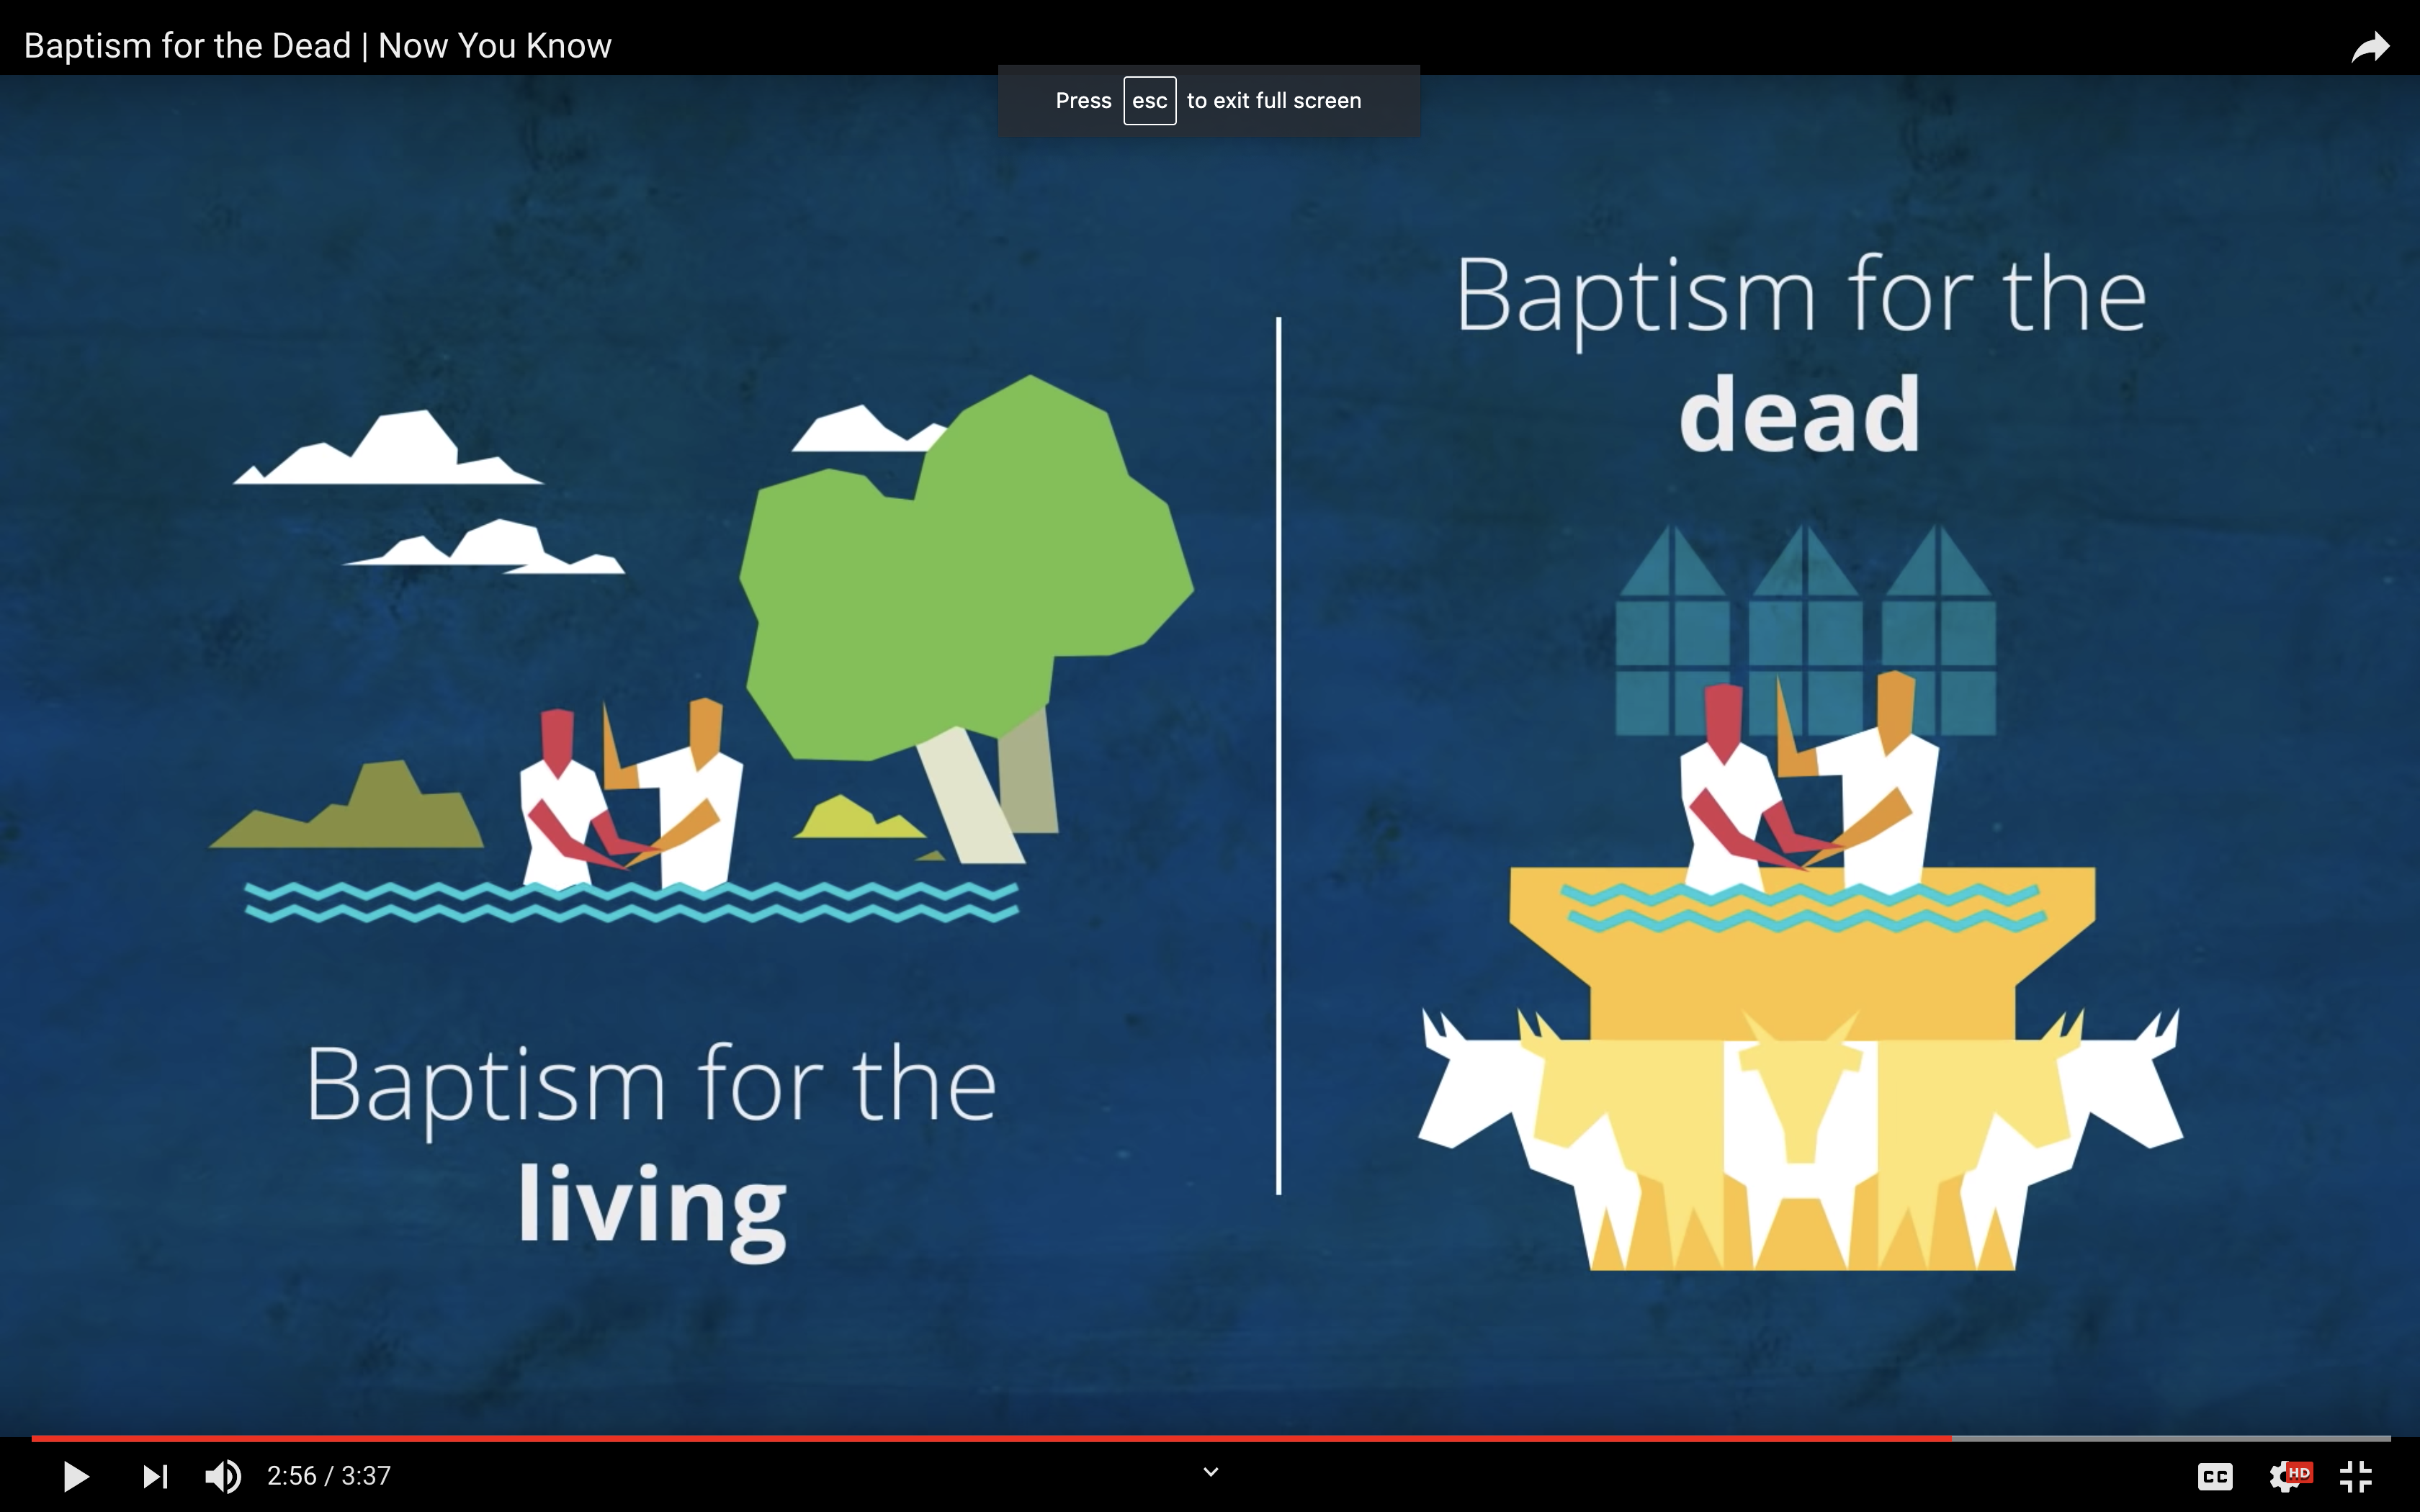 Baptism for the Living and Baptism for the Dead